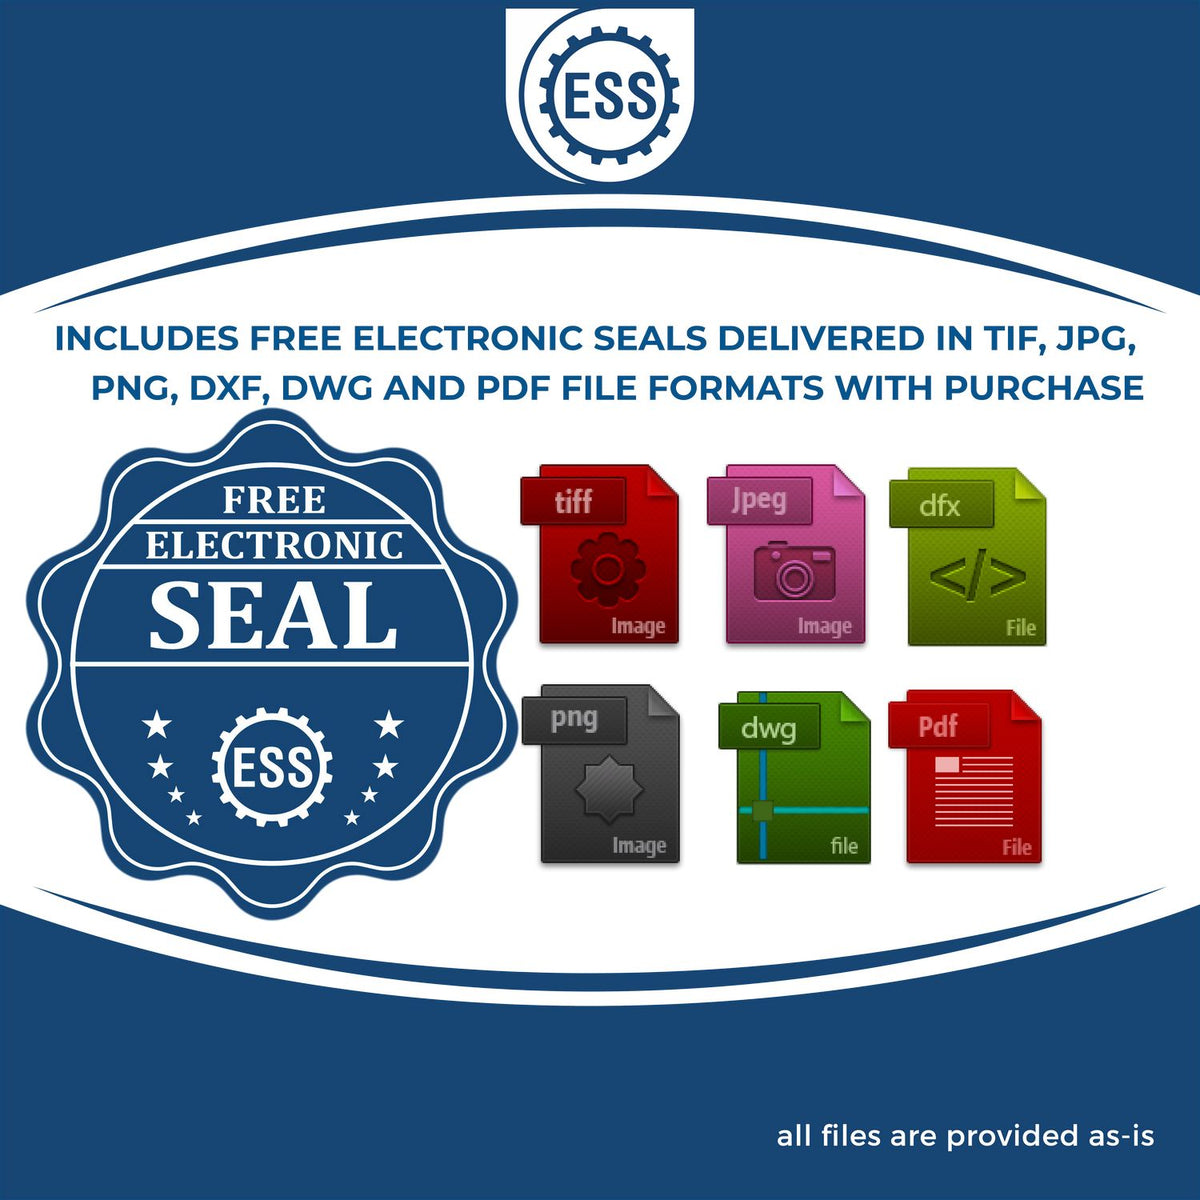 An infographic for the free electronic seal for the Long Reach District of Columbia Land Surveyor Seal illustrating the different file type icons such as DXF, DWG, TIF, JPG and PNG.